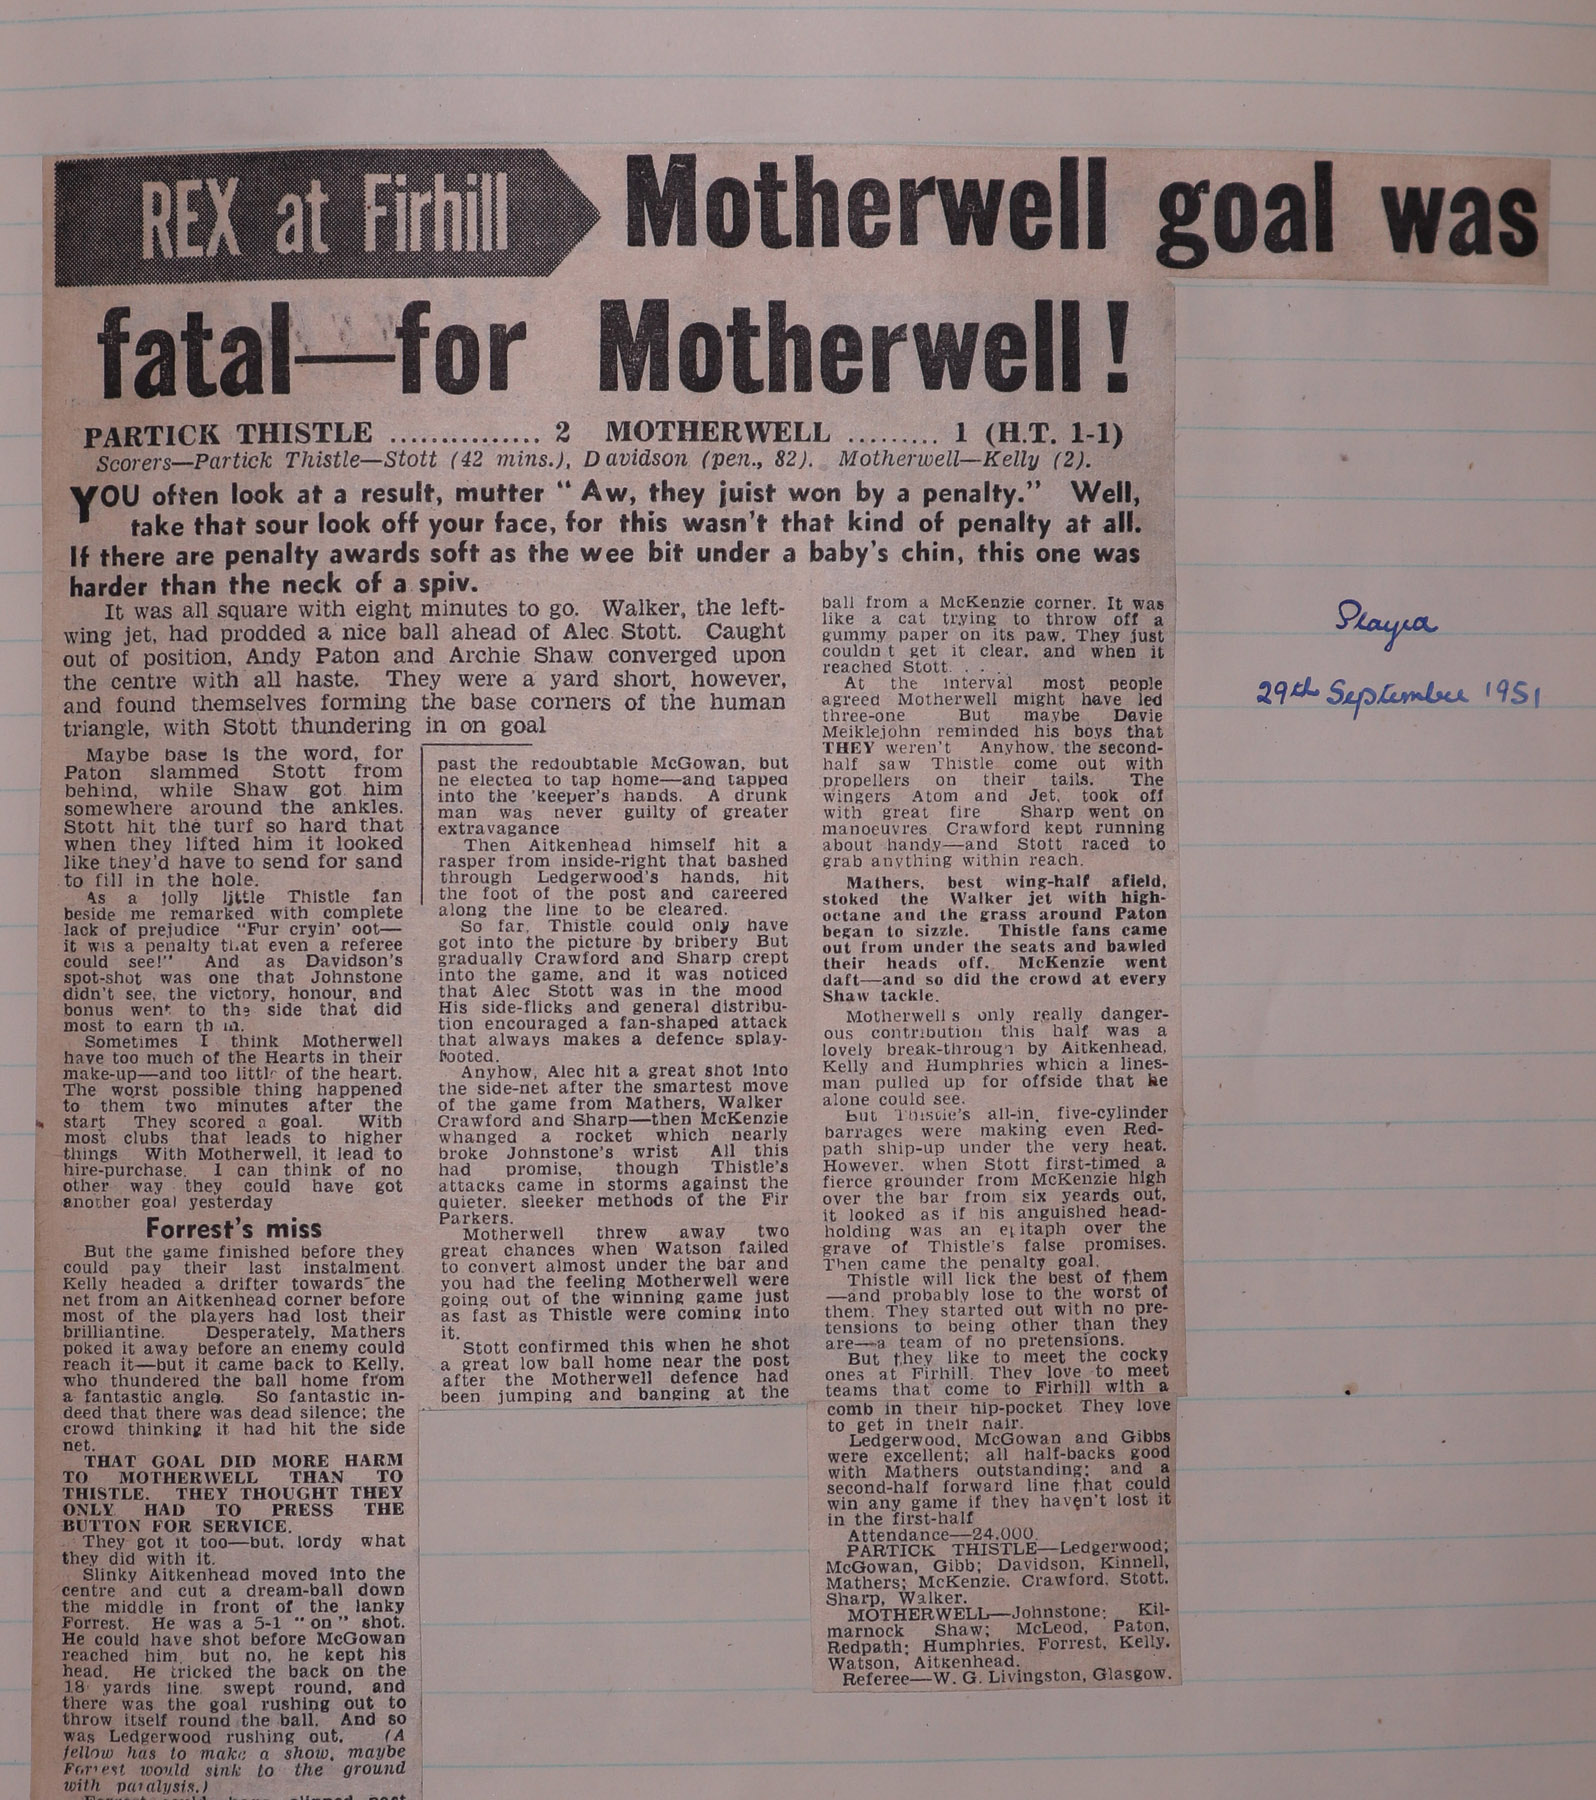 1951-09-29_Partick_Thistle_2-1_Motherwell_L1